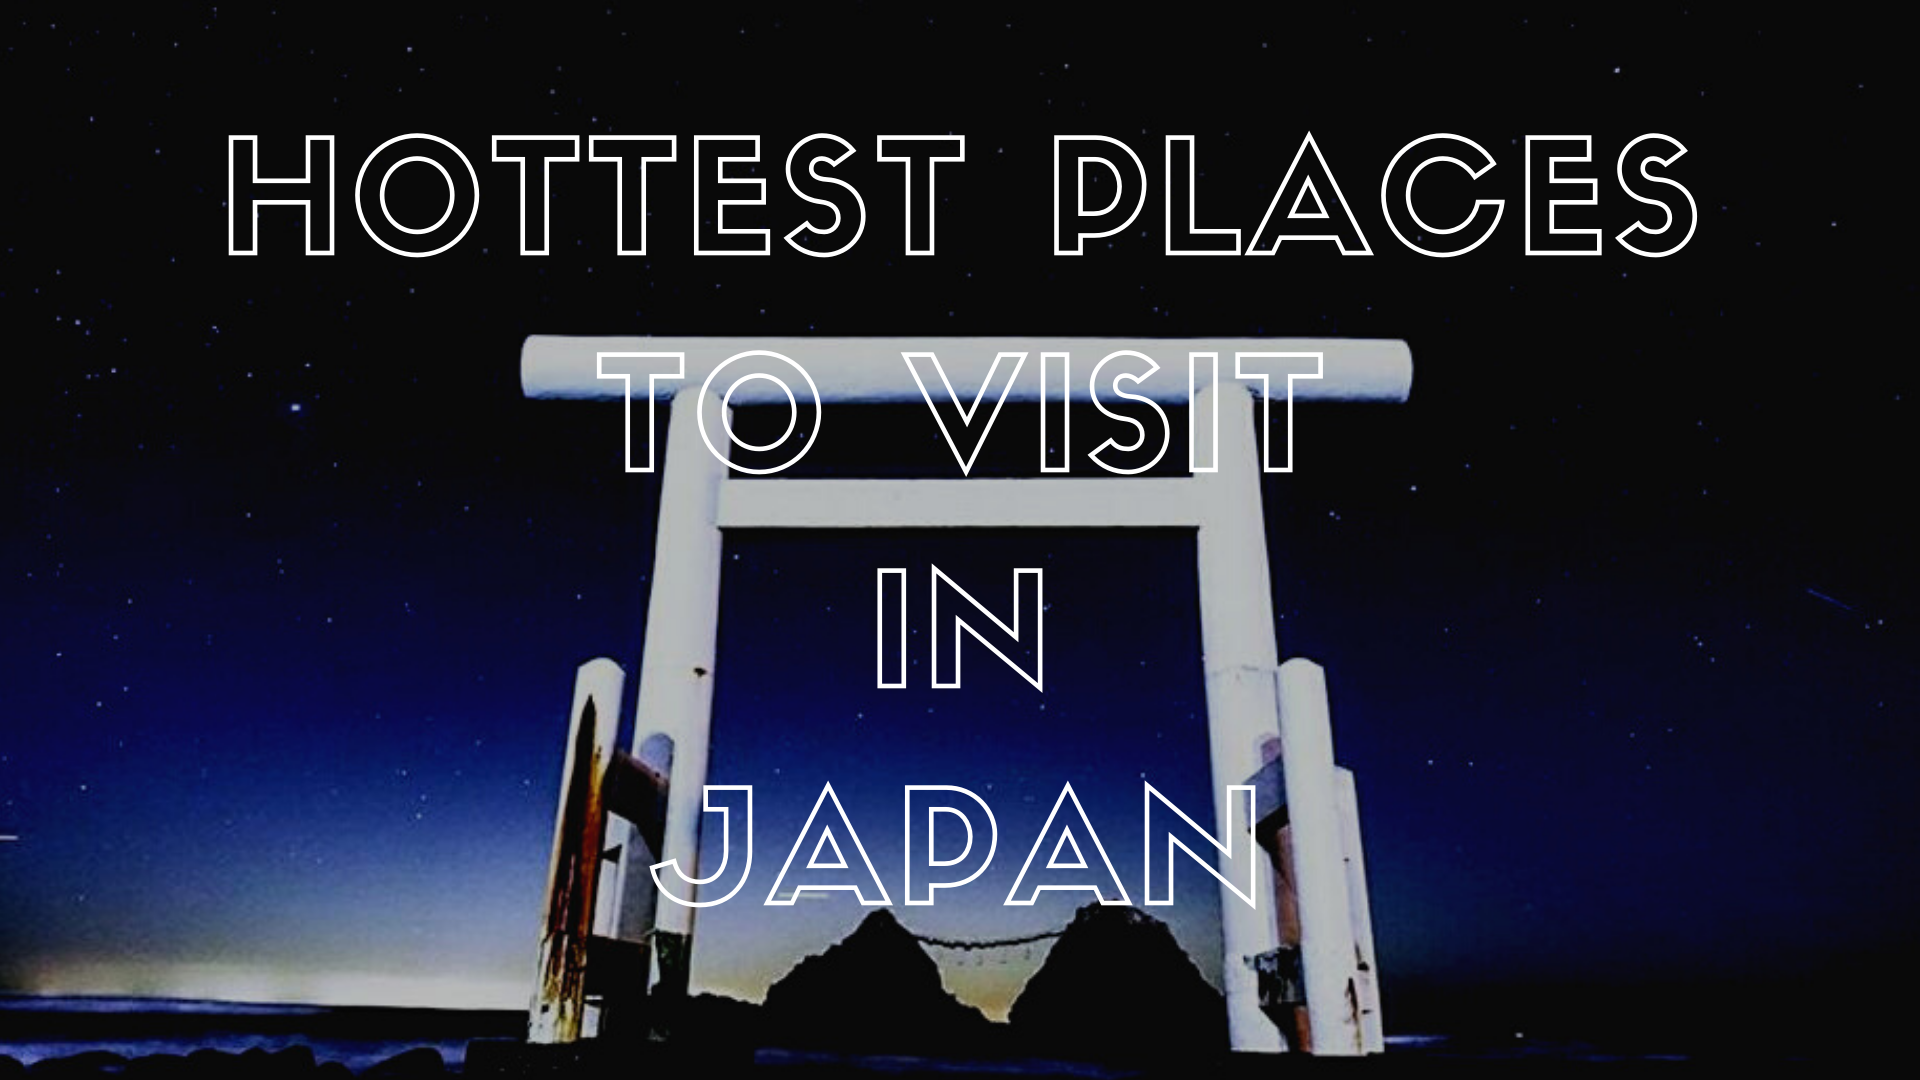 10 Hottest Places to Visit in Japan